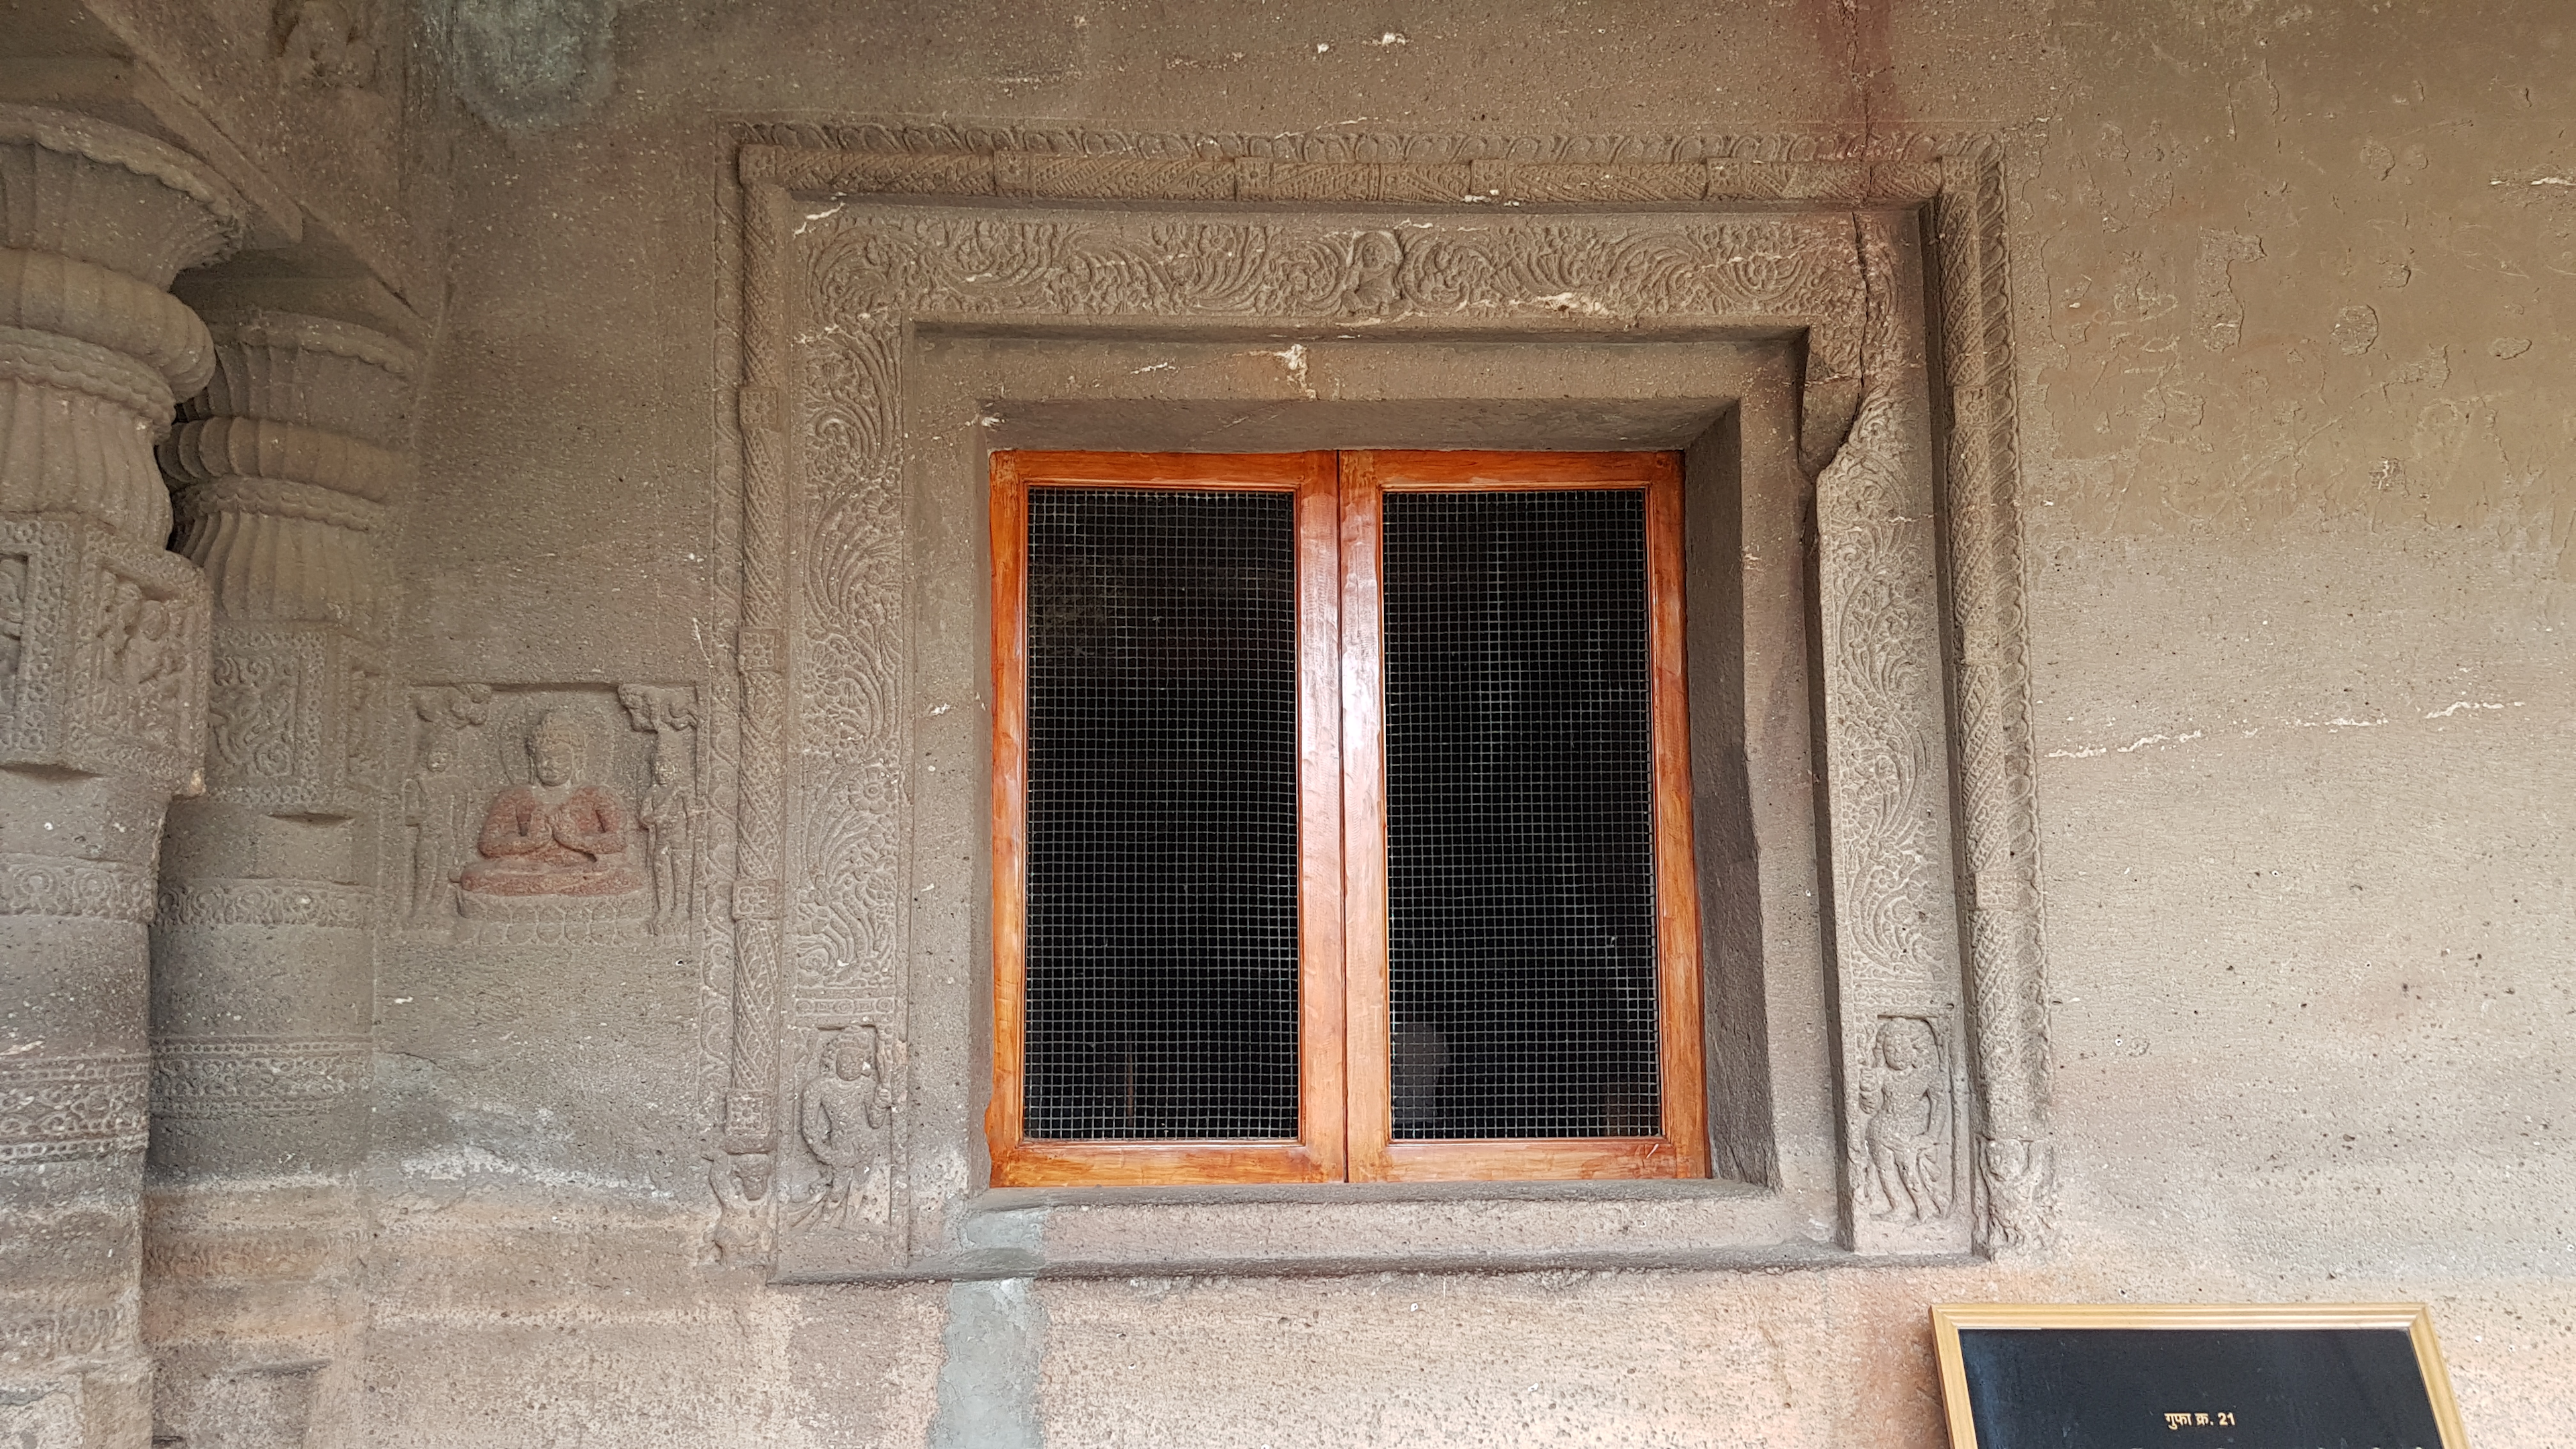 Carved window in cave 21, shuttered from inside